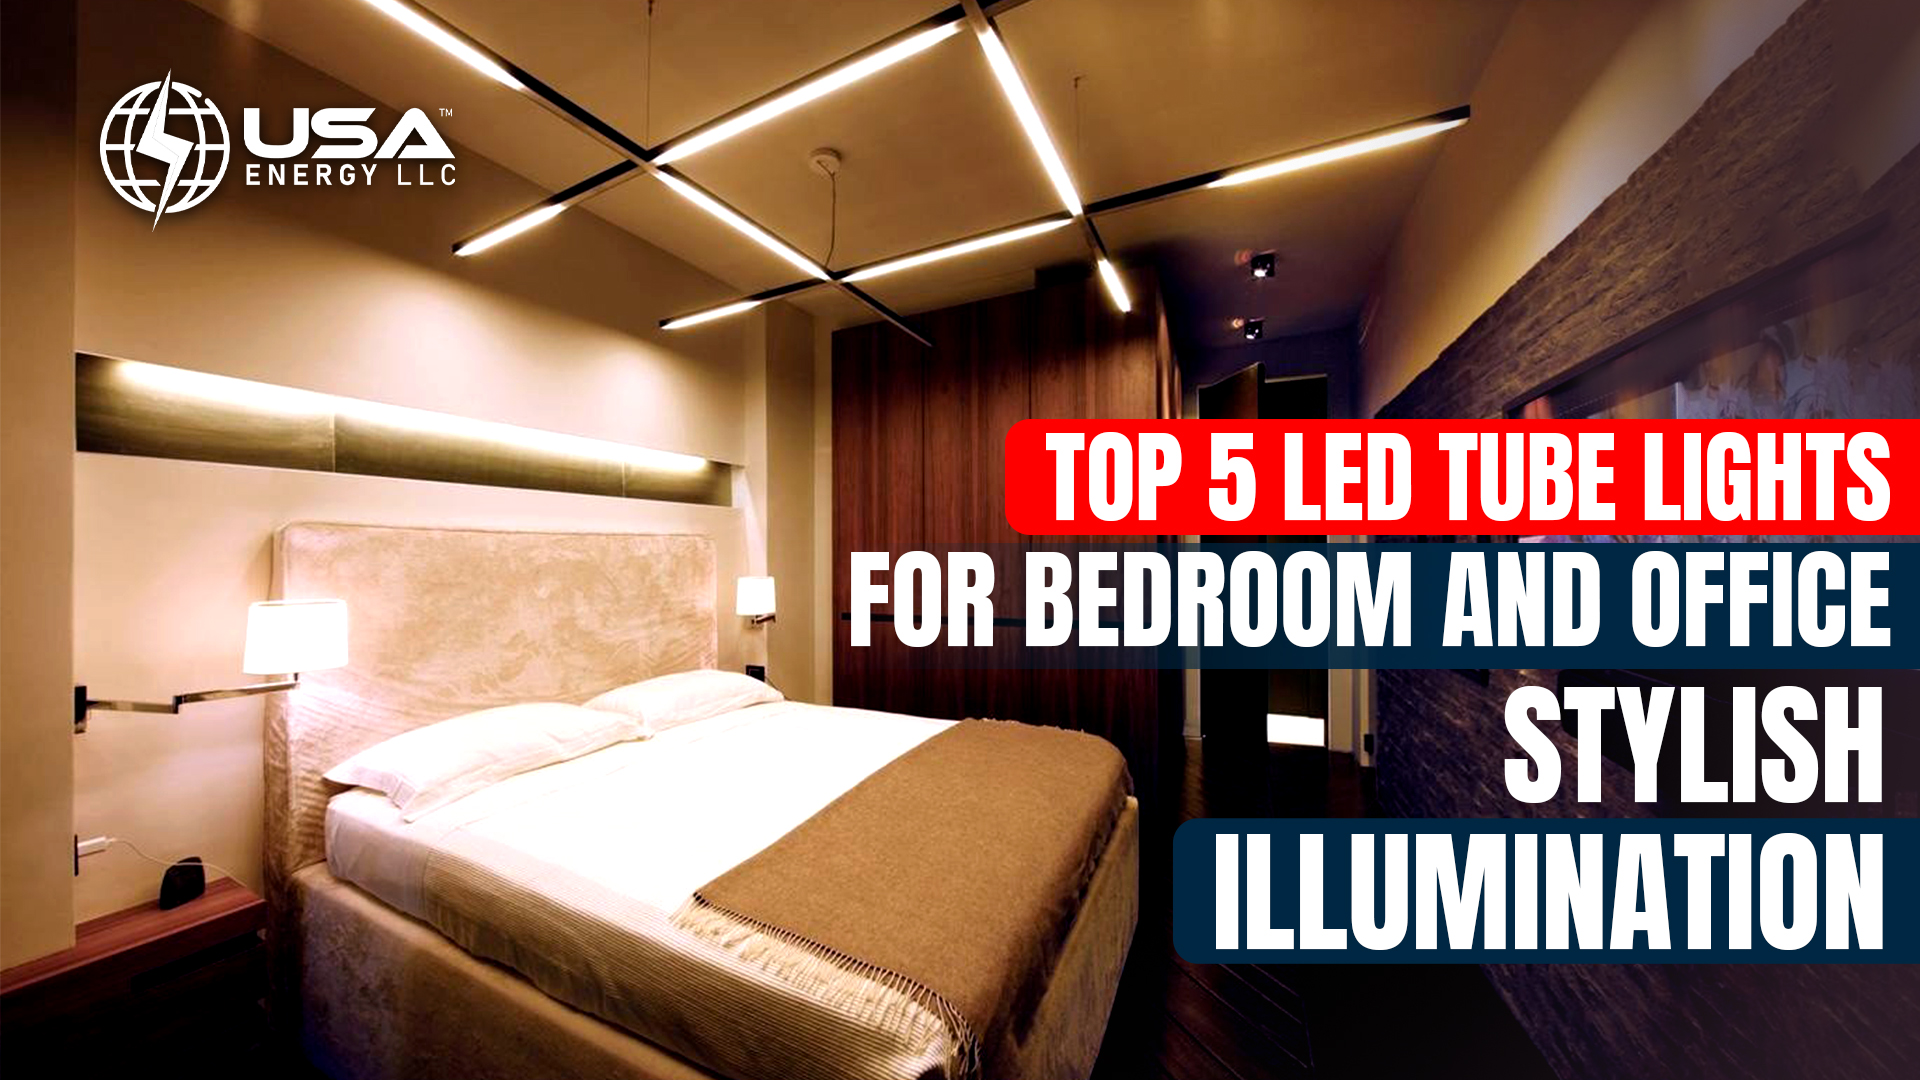 Top 5 LED Tube Lights for Bedroom and Office Stylish Illumination